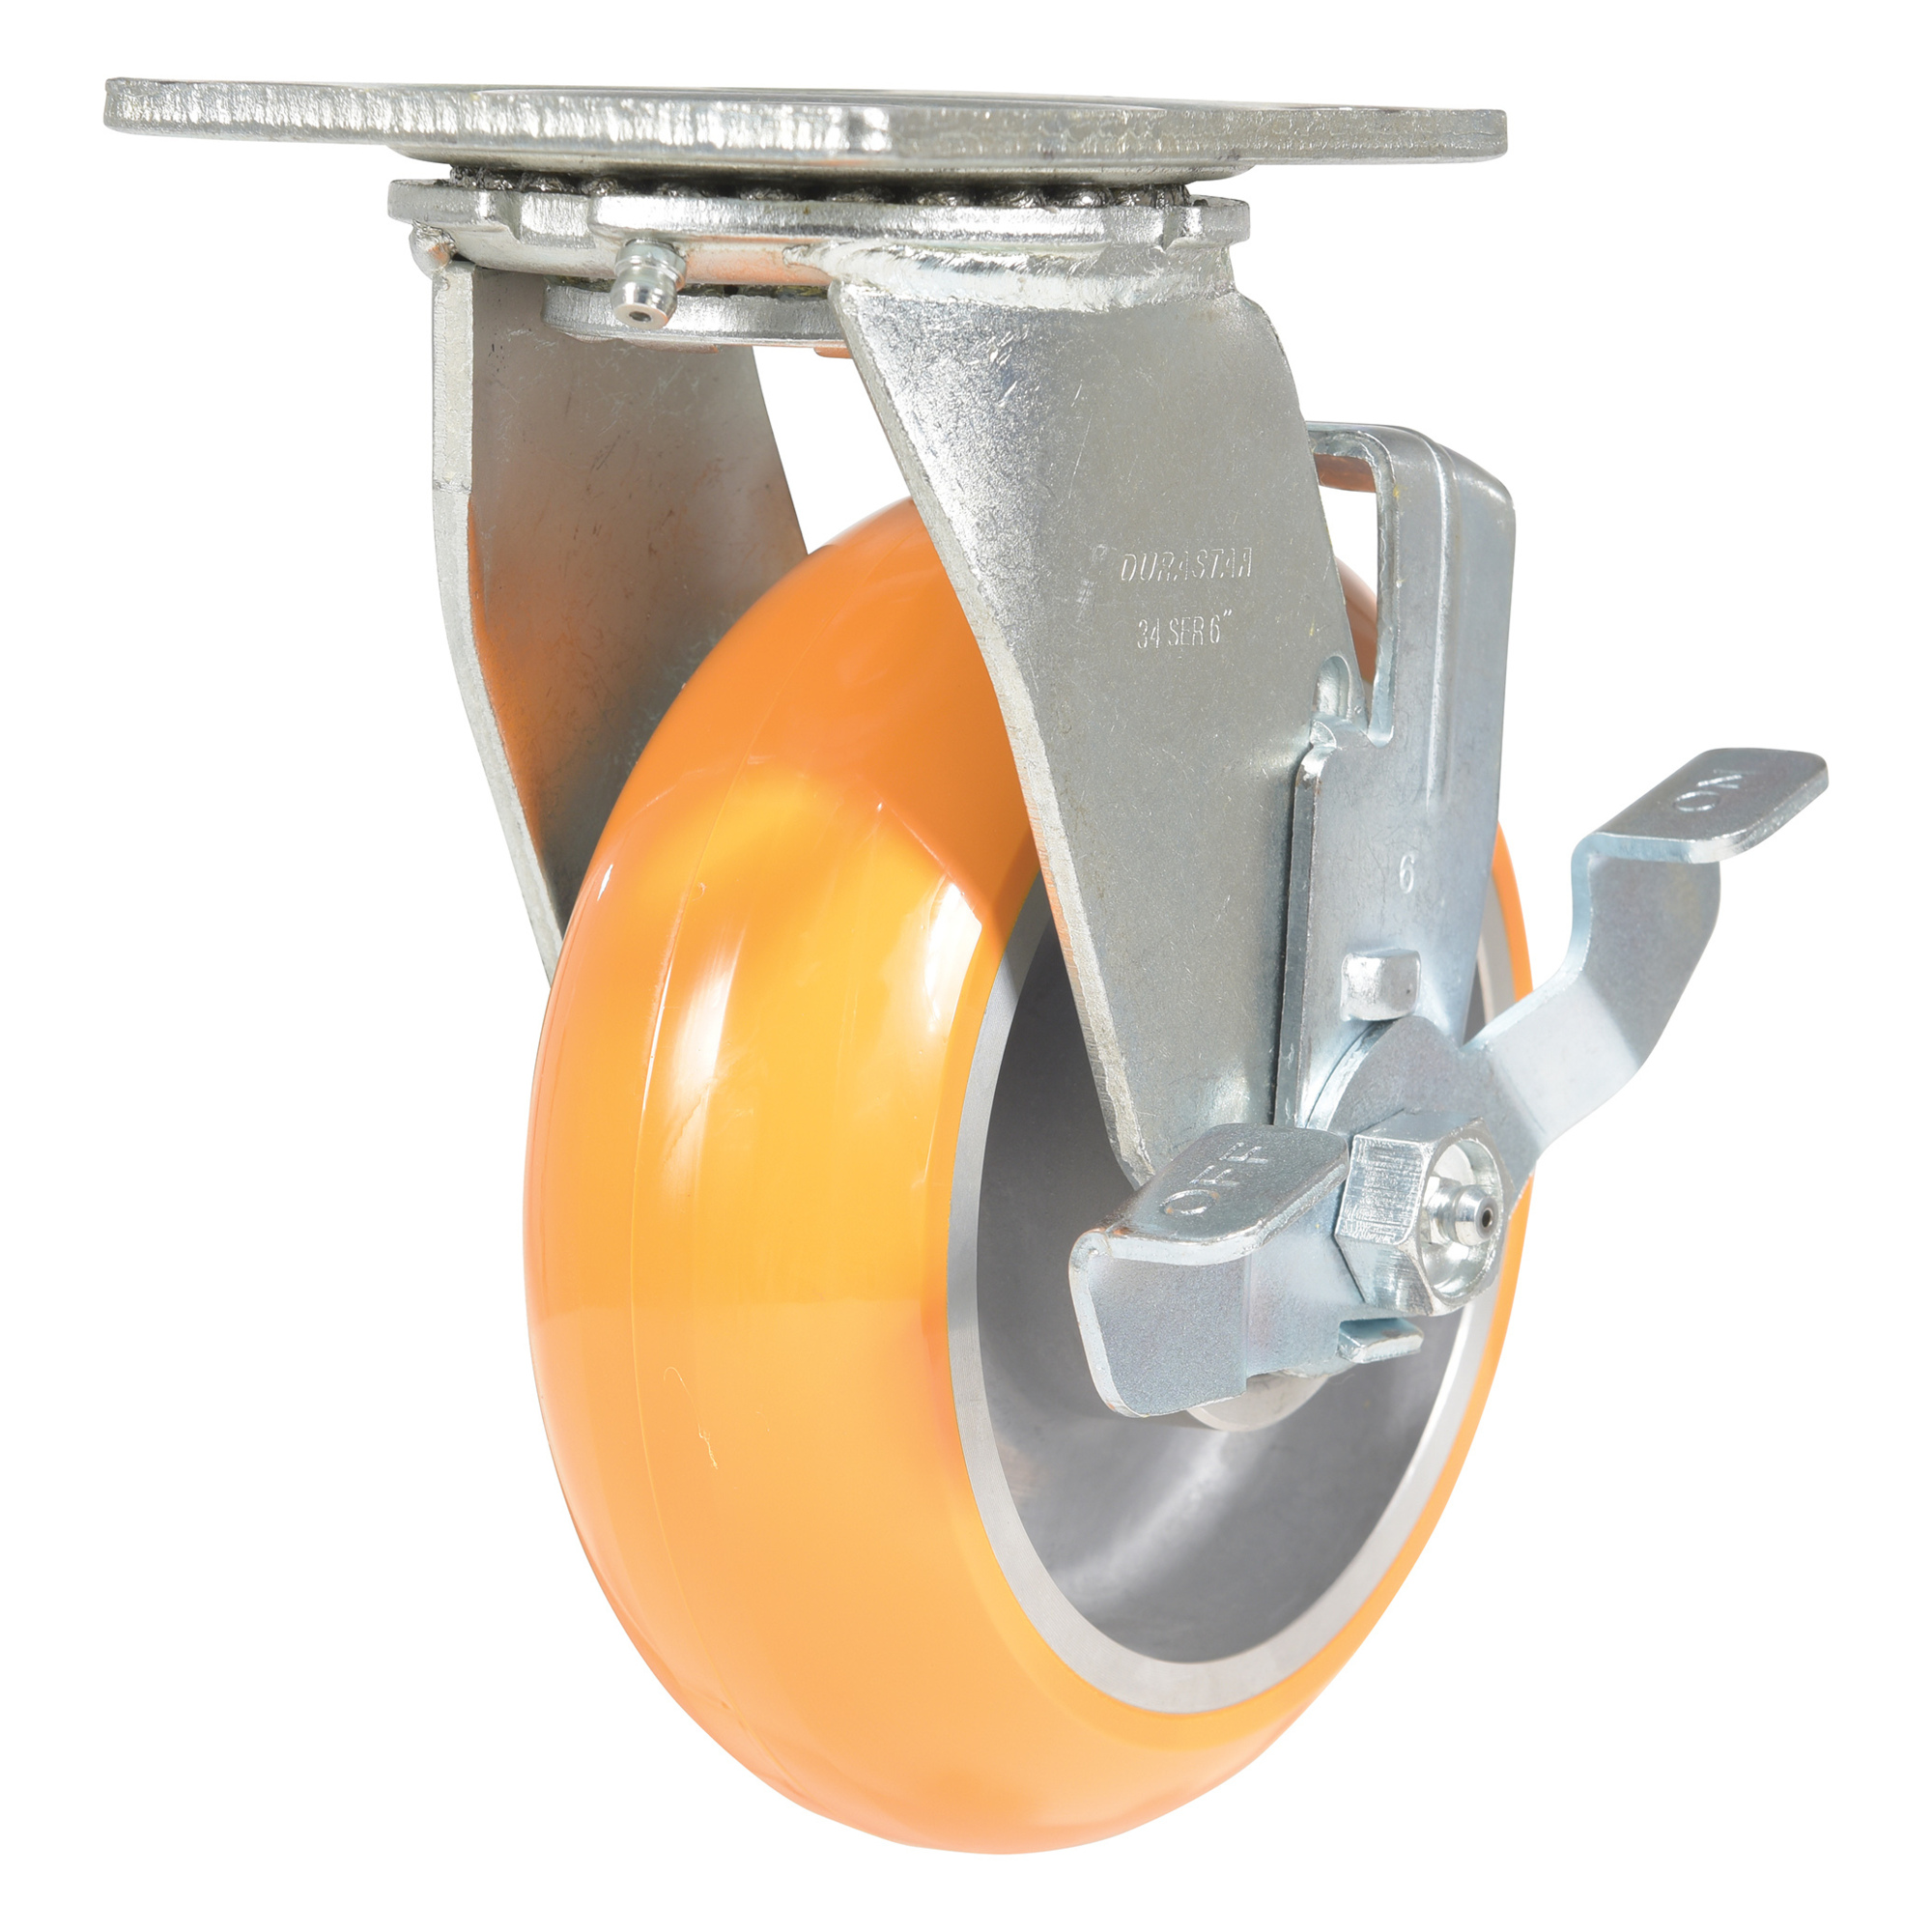 Vestil, Poly swivel with brake 6x2 1250 pounds, Wheel Diameter 6 in, Package (qty.) 1 Model CST-F34-6X2SI-SWB